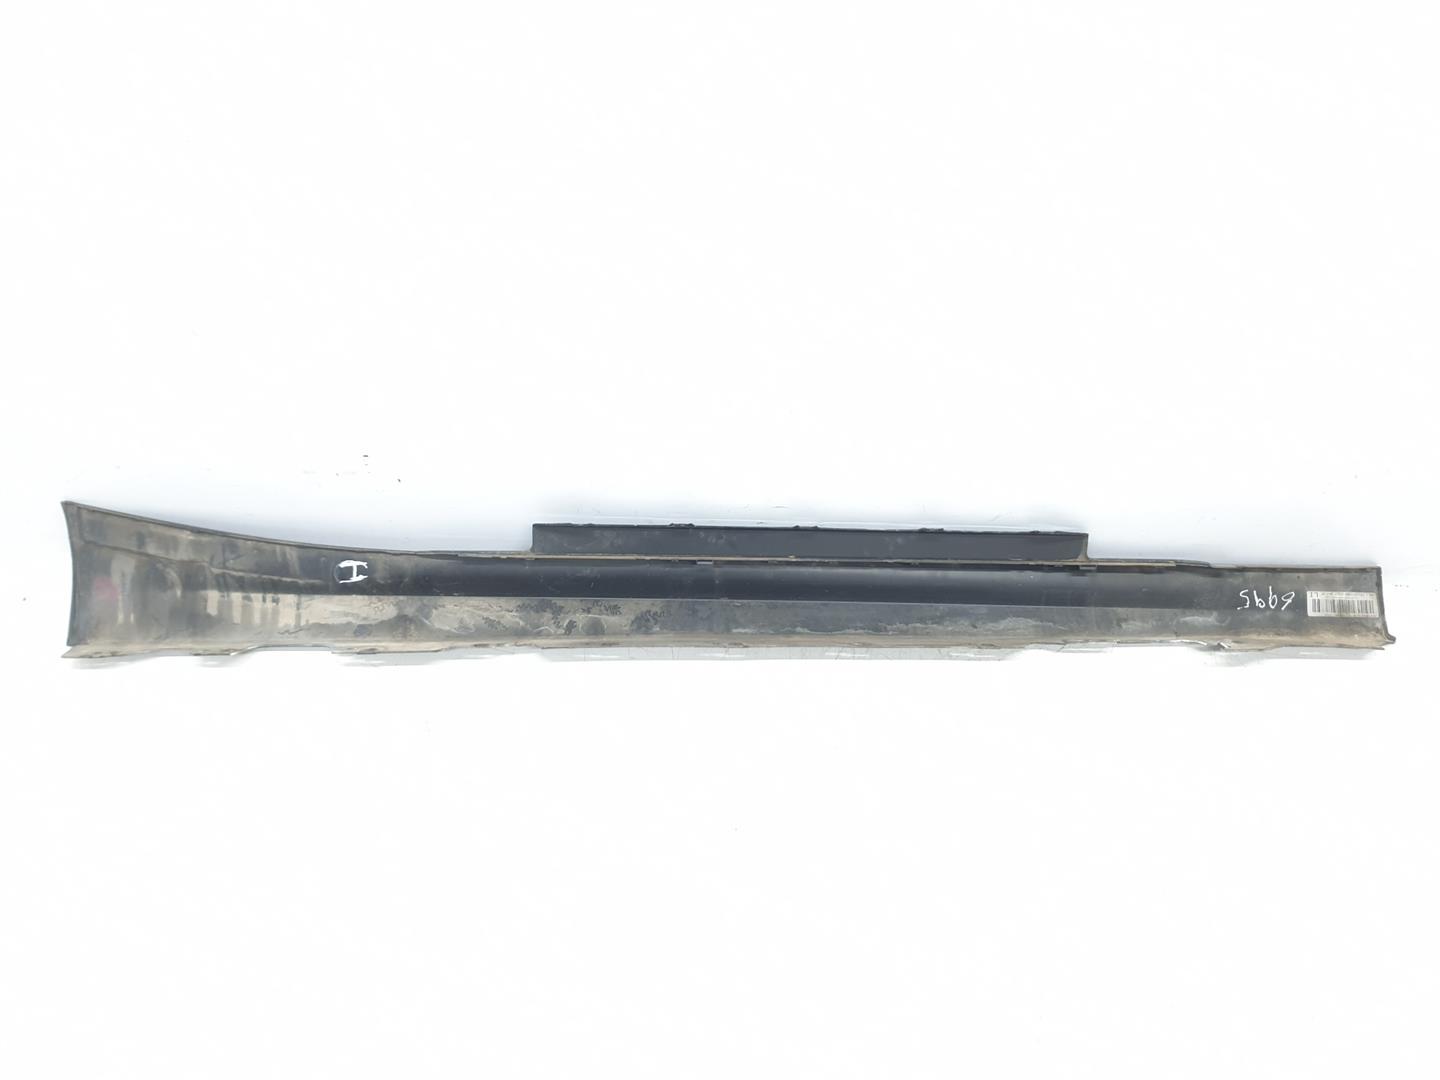 BMW 1 Series F20/F21 (2011-2020) Other Body Parts 8056817, 51778056817, COLORGRISMINERALB39 24248837